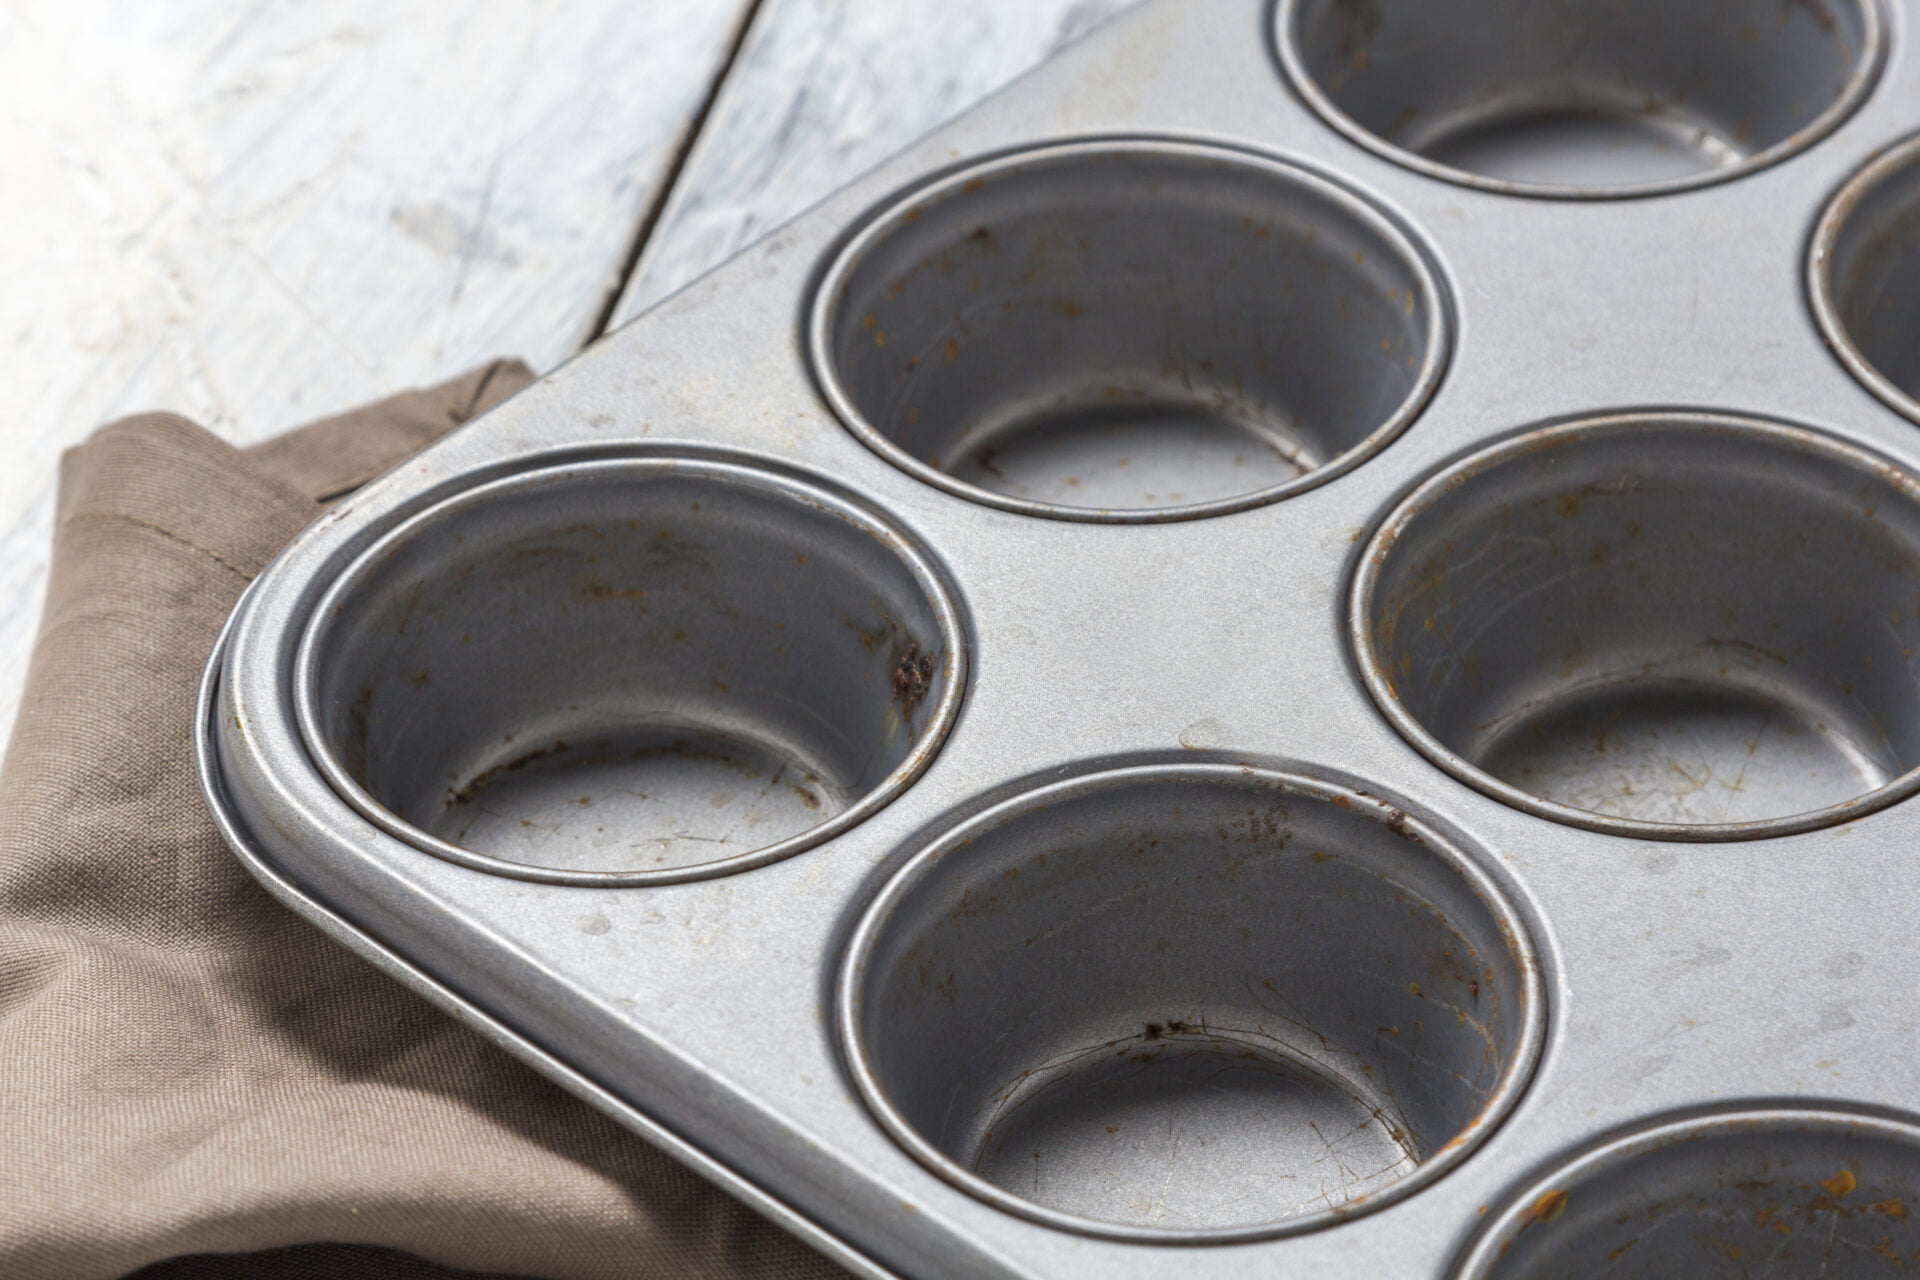 Muffin baking tray on a rustic wooden table